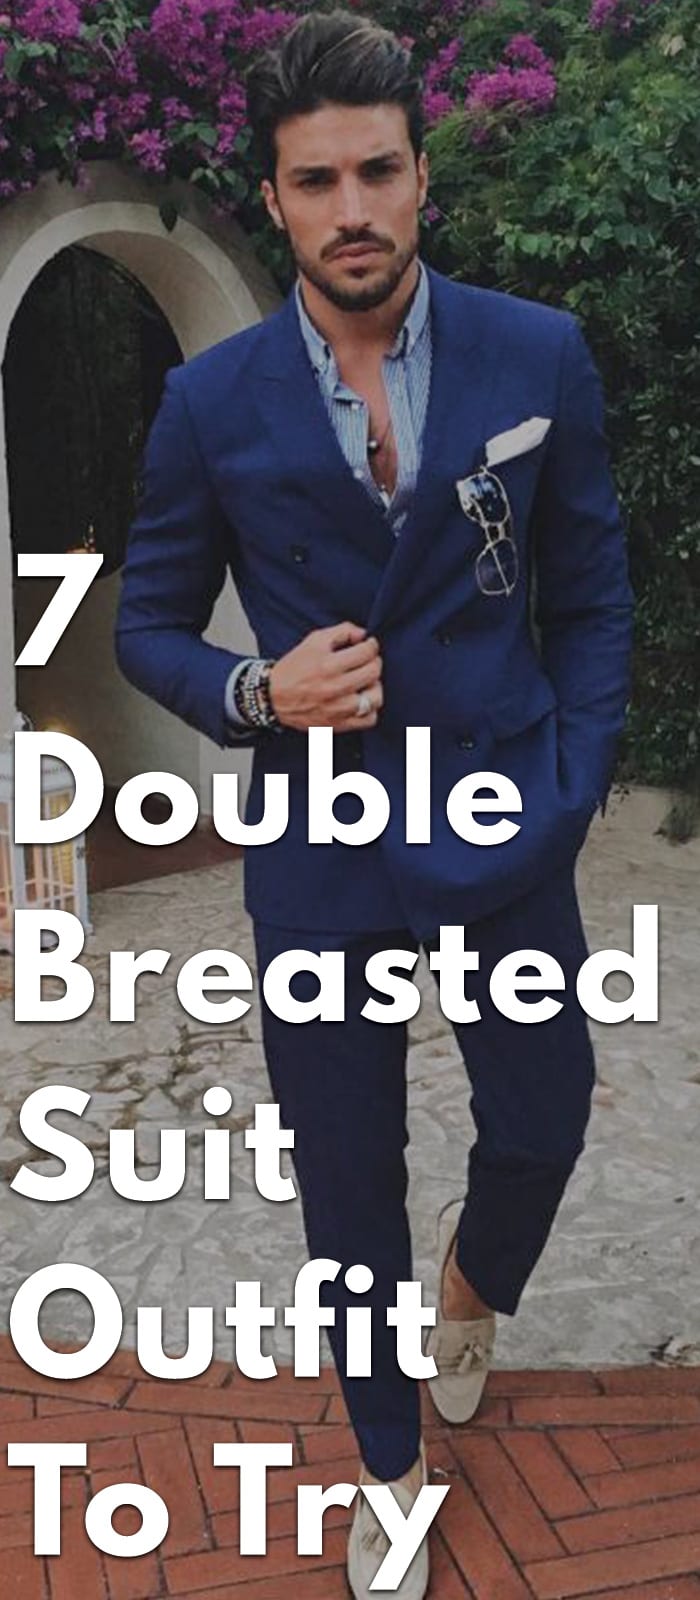 7-Double-Breasted-Suit-Outfit-To-Try